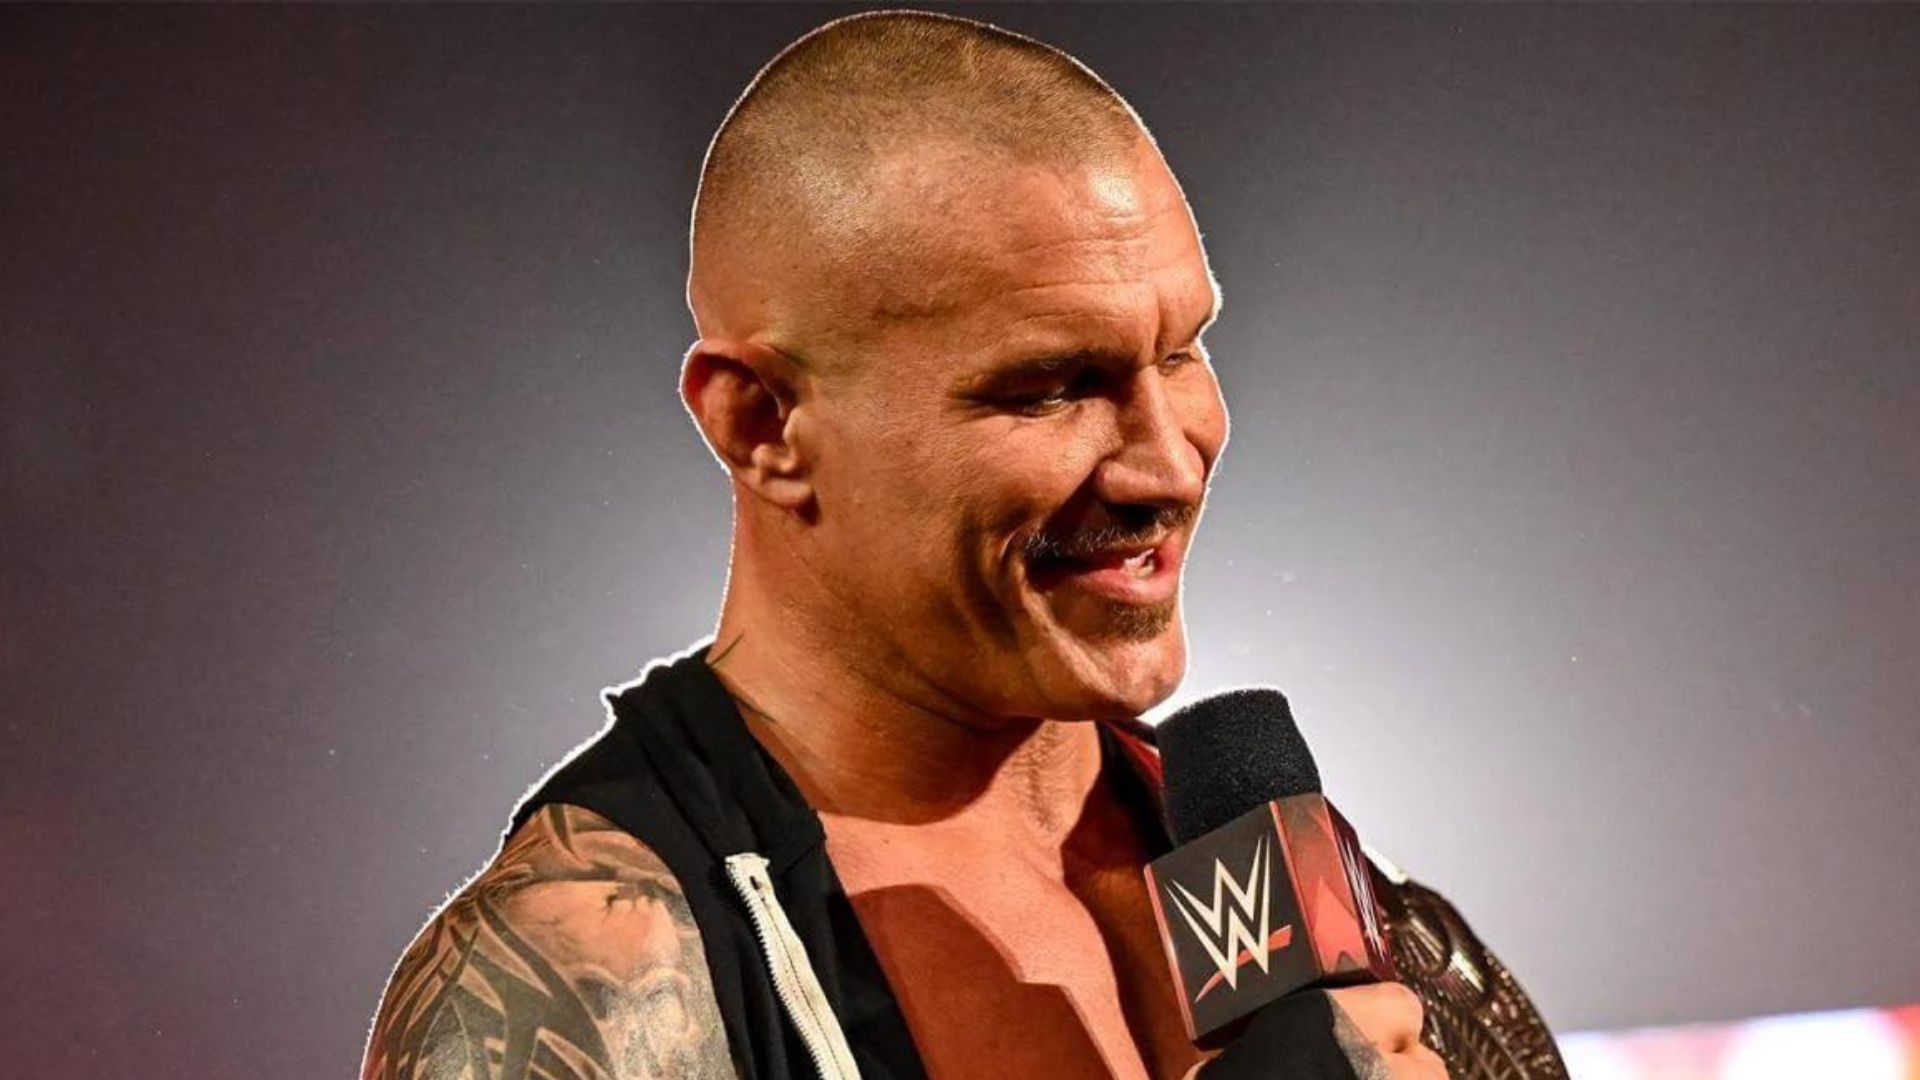 Orton is now officially on the SmackDown roster.